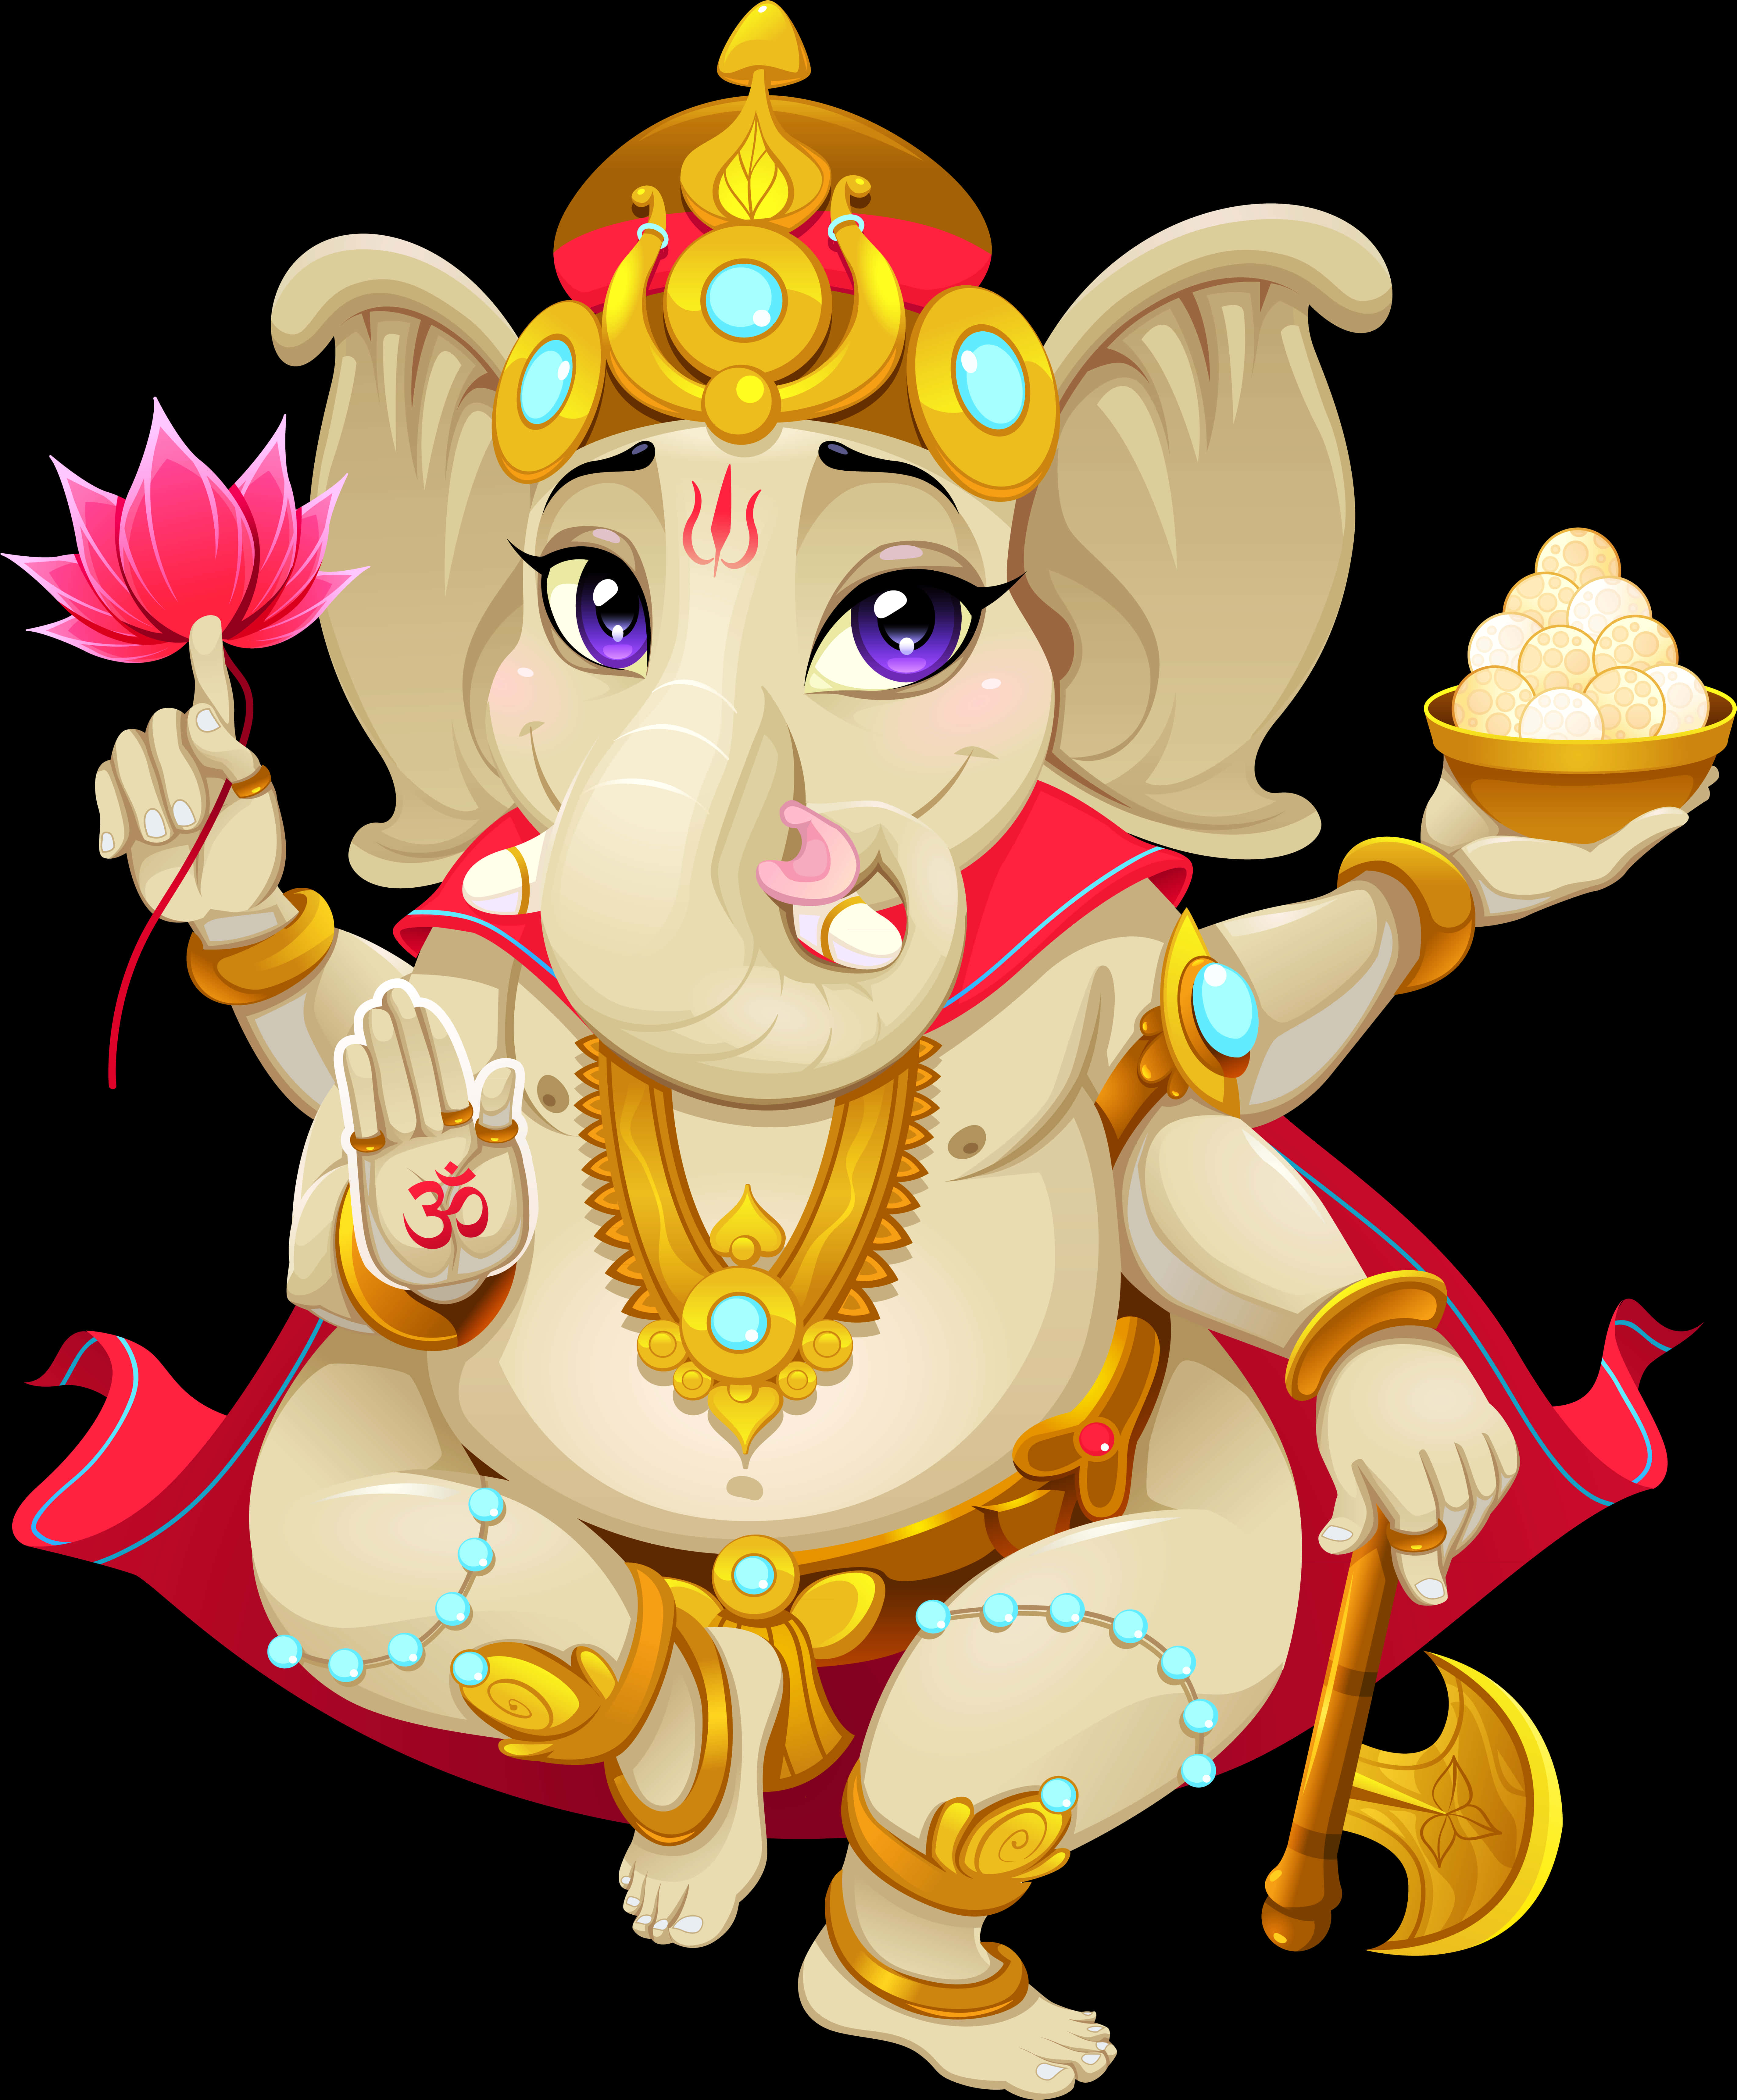 A Cartoon Of An Elephant Holding A Flower And A Bowl Of Eggs